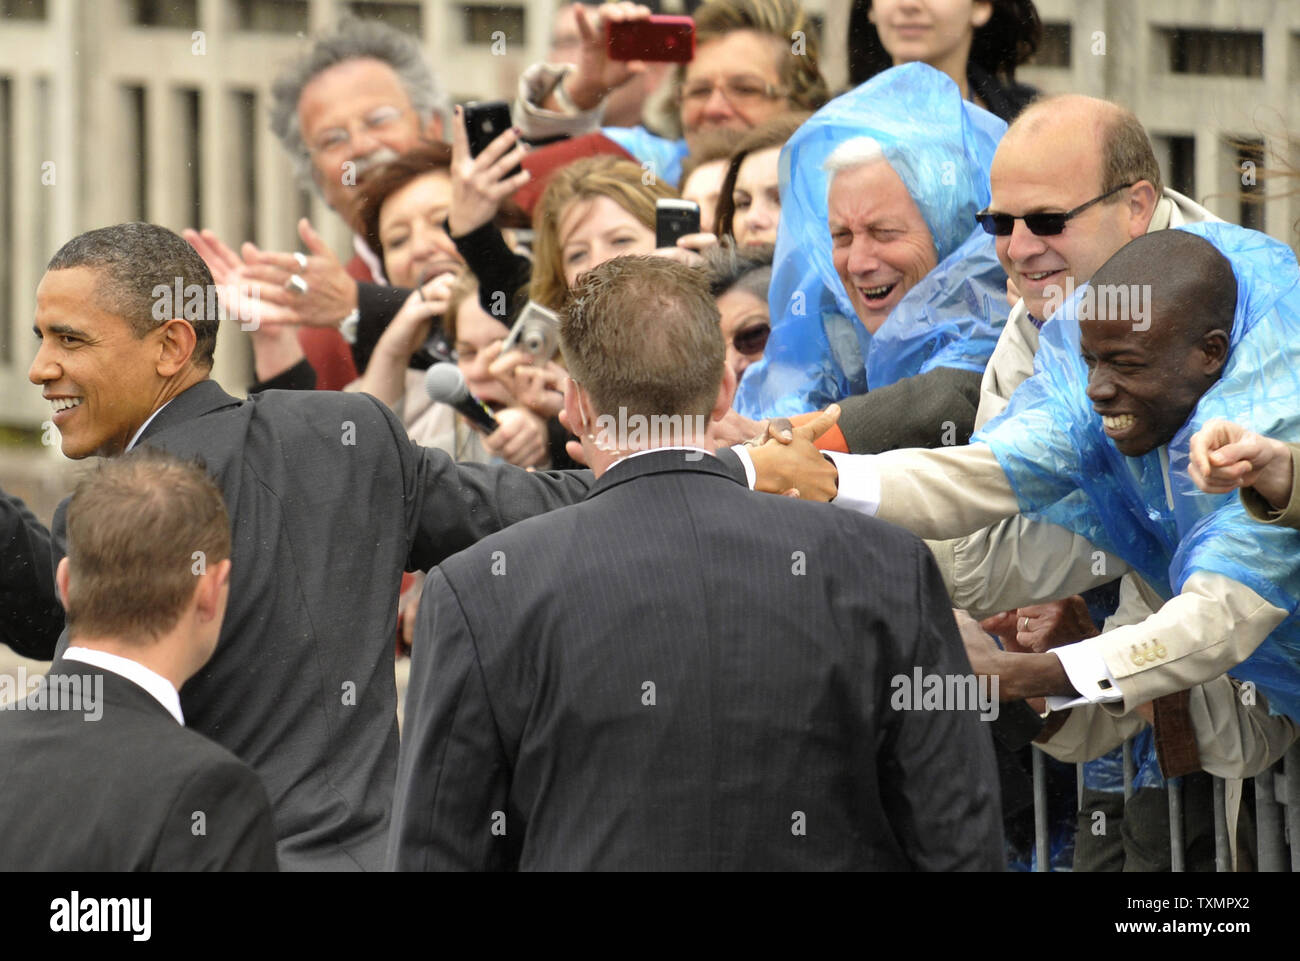 U.S. President Barack Obama greets people as he arrives at the G8 Summit in Deauville, France, May 26, 2011. UPI Stock Photo